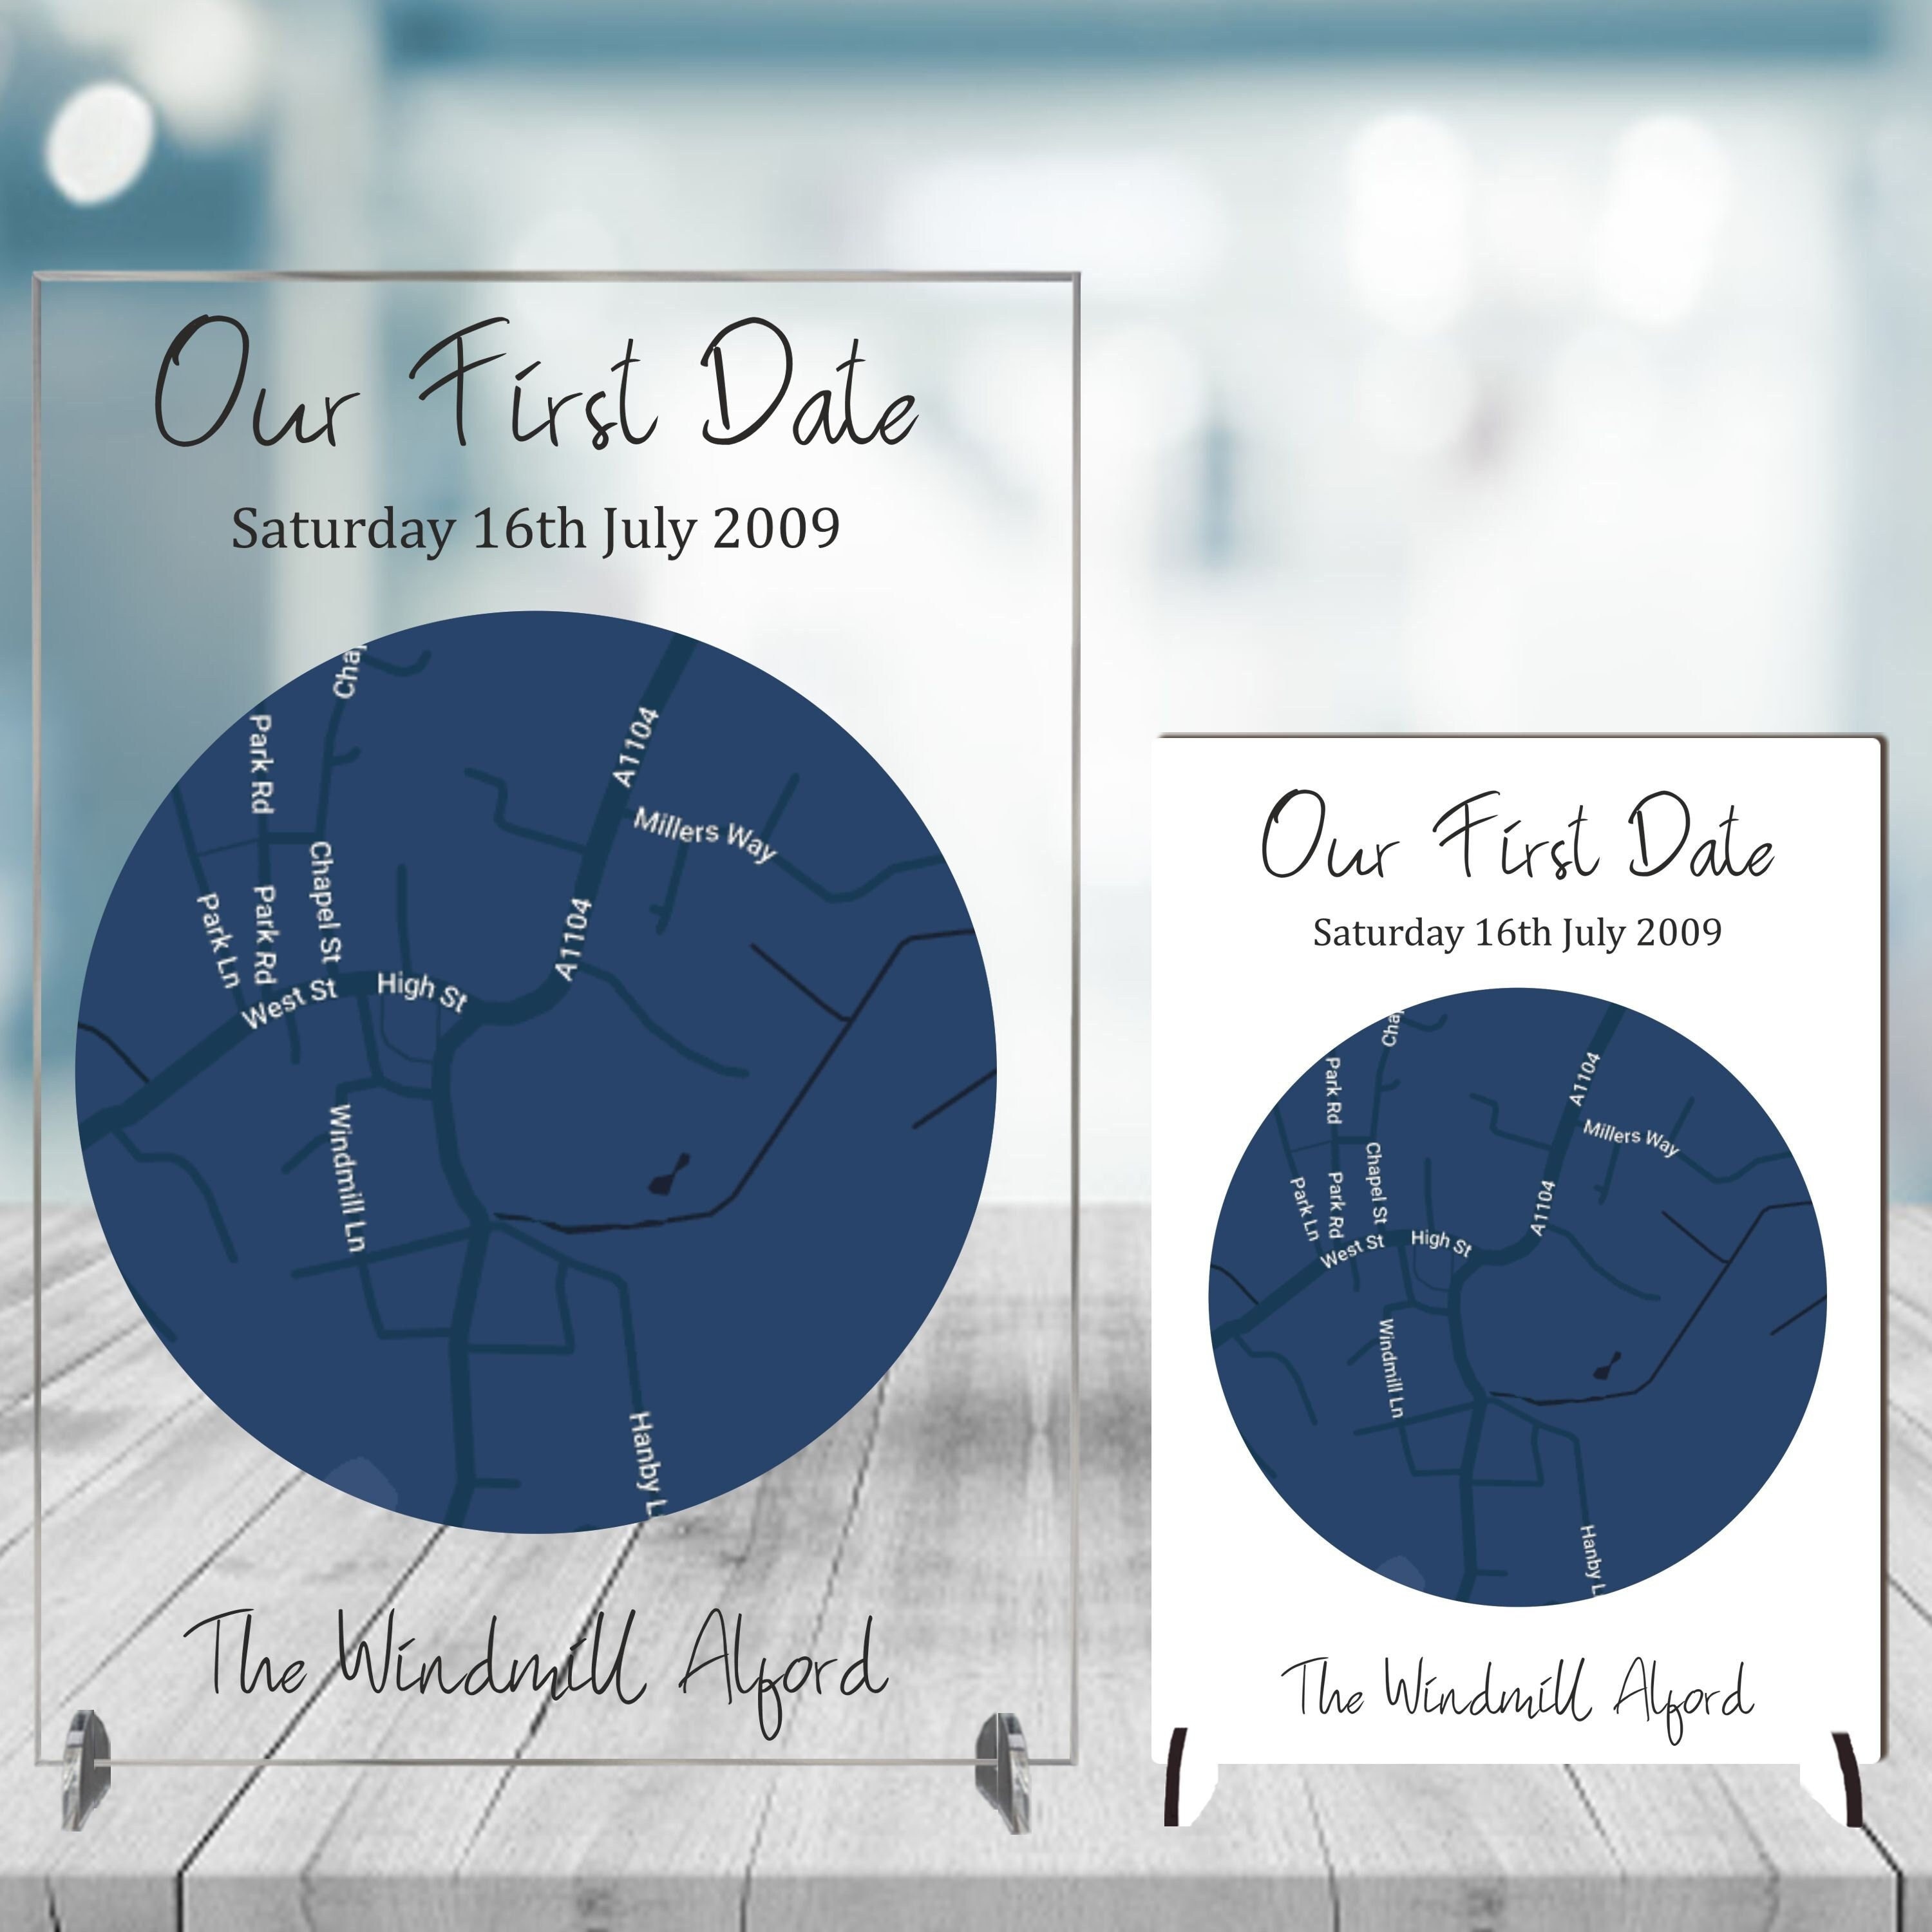 Our First Date Map Acrylic Plaque Gift,personalized Gifts, First Date Map  Print, First Date Gifts, First Date Anniversary, First Date Plaque 